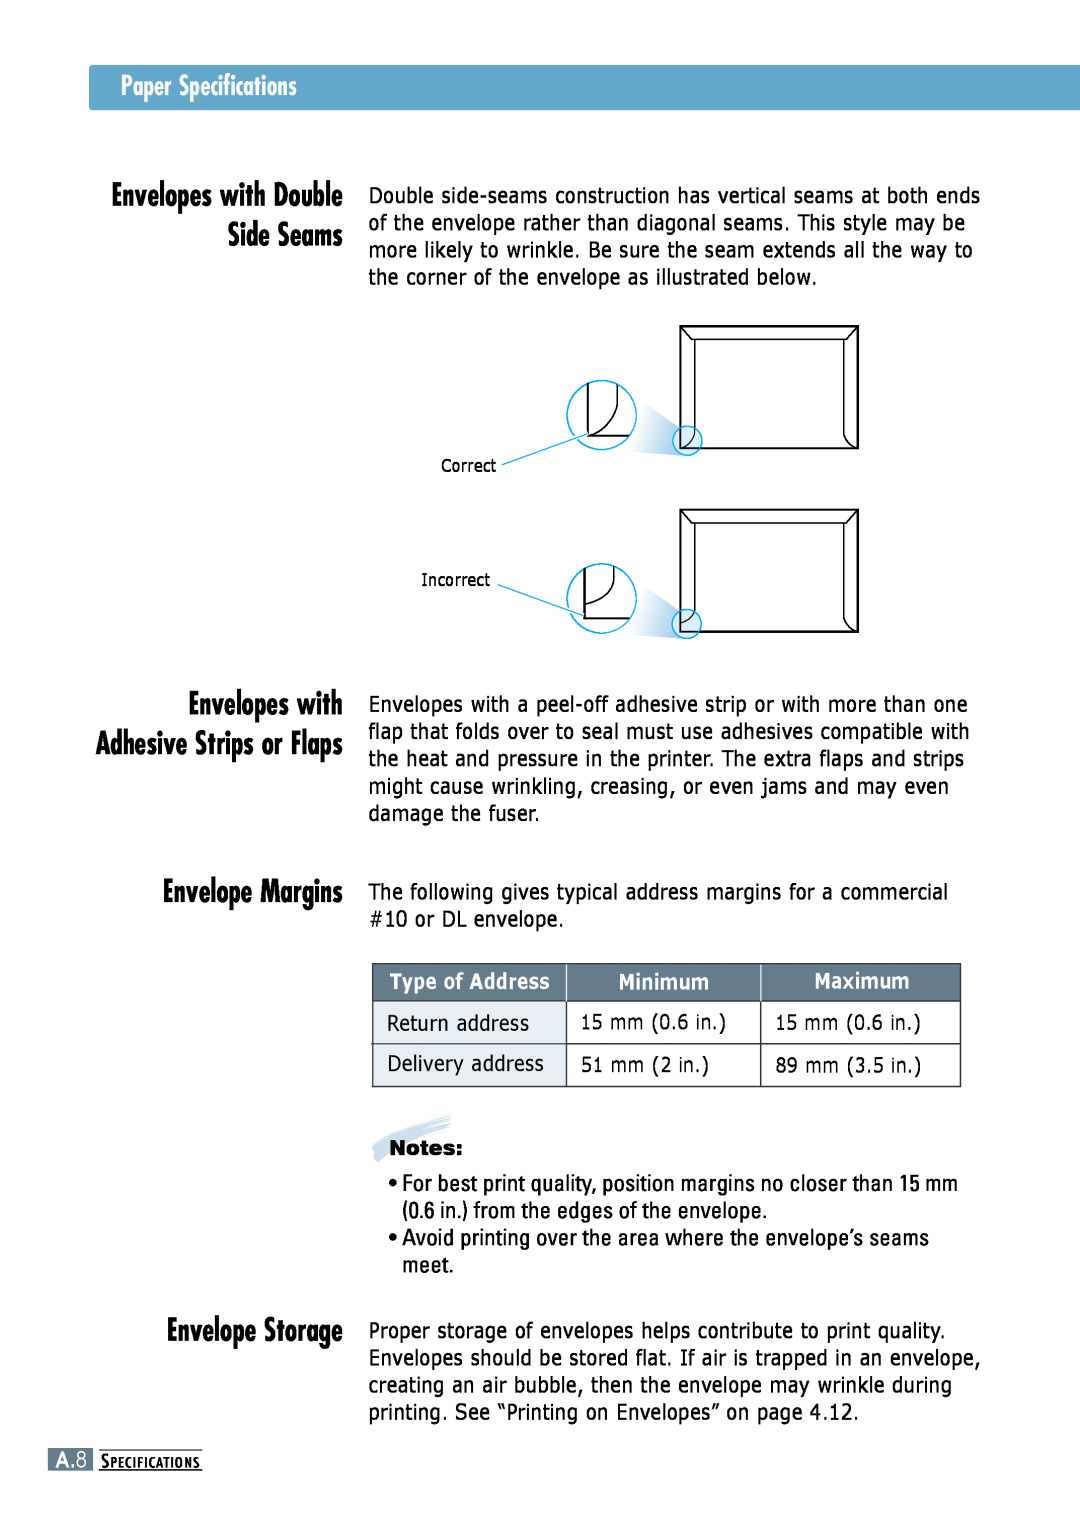 Samsung ML-6060S manual Paper Specifications, Avoid printing over the area where the envelope’s seams meet, Type of Address 